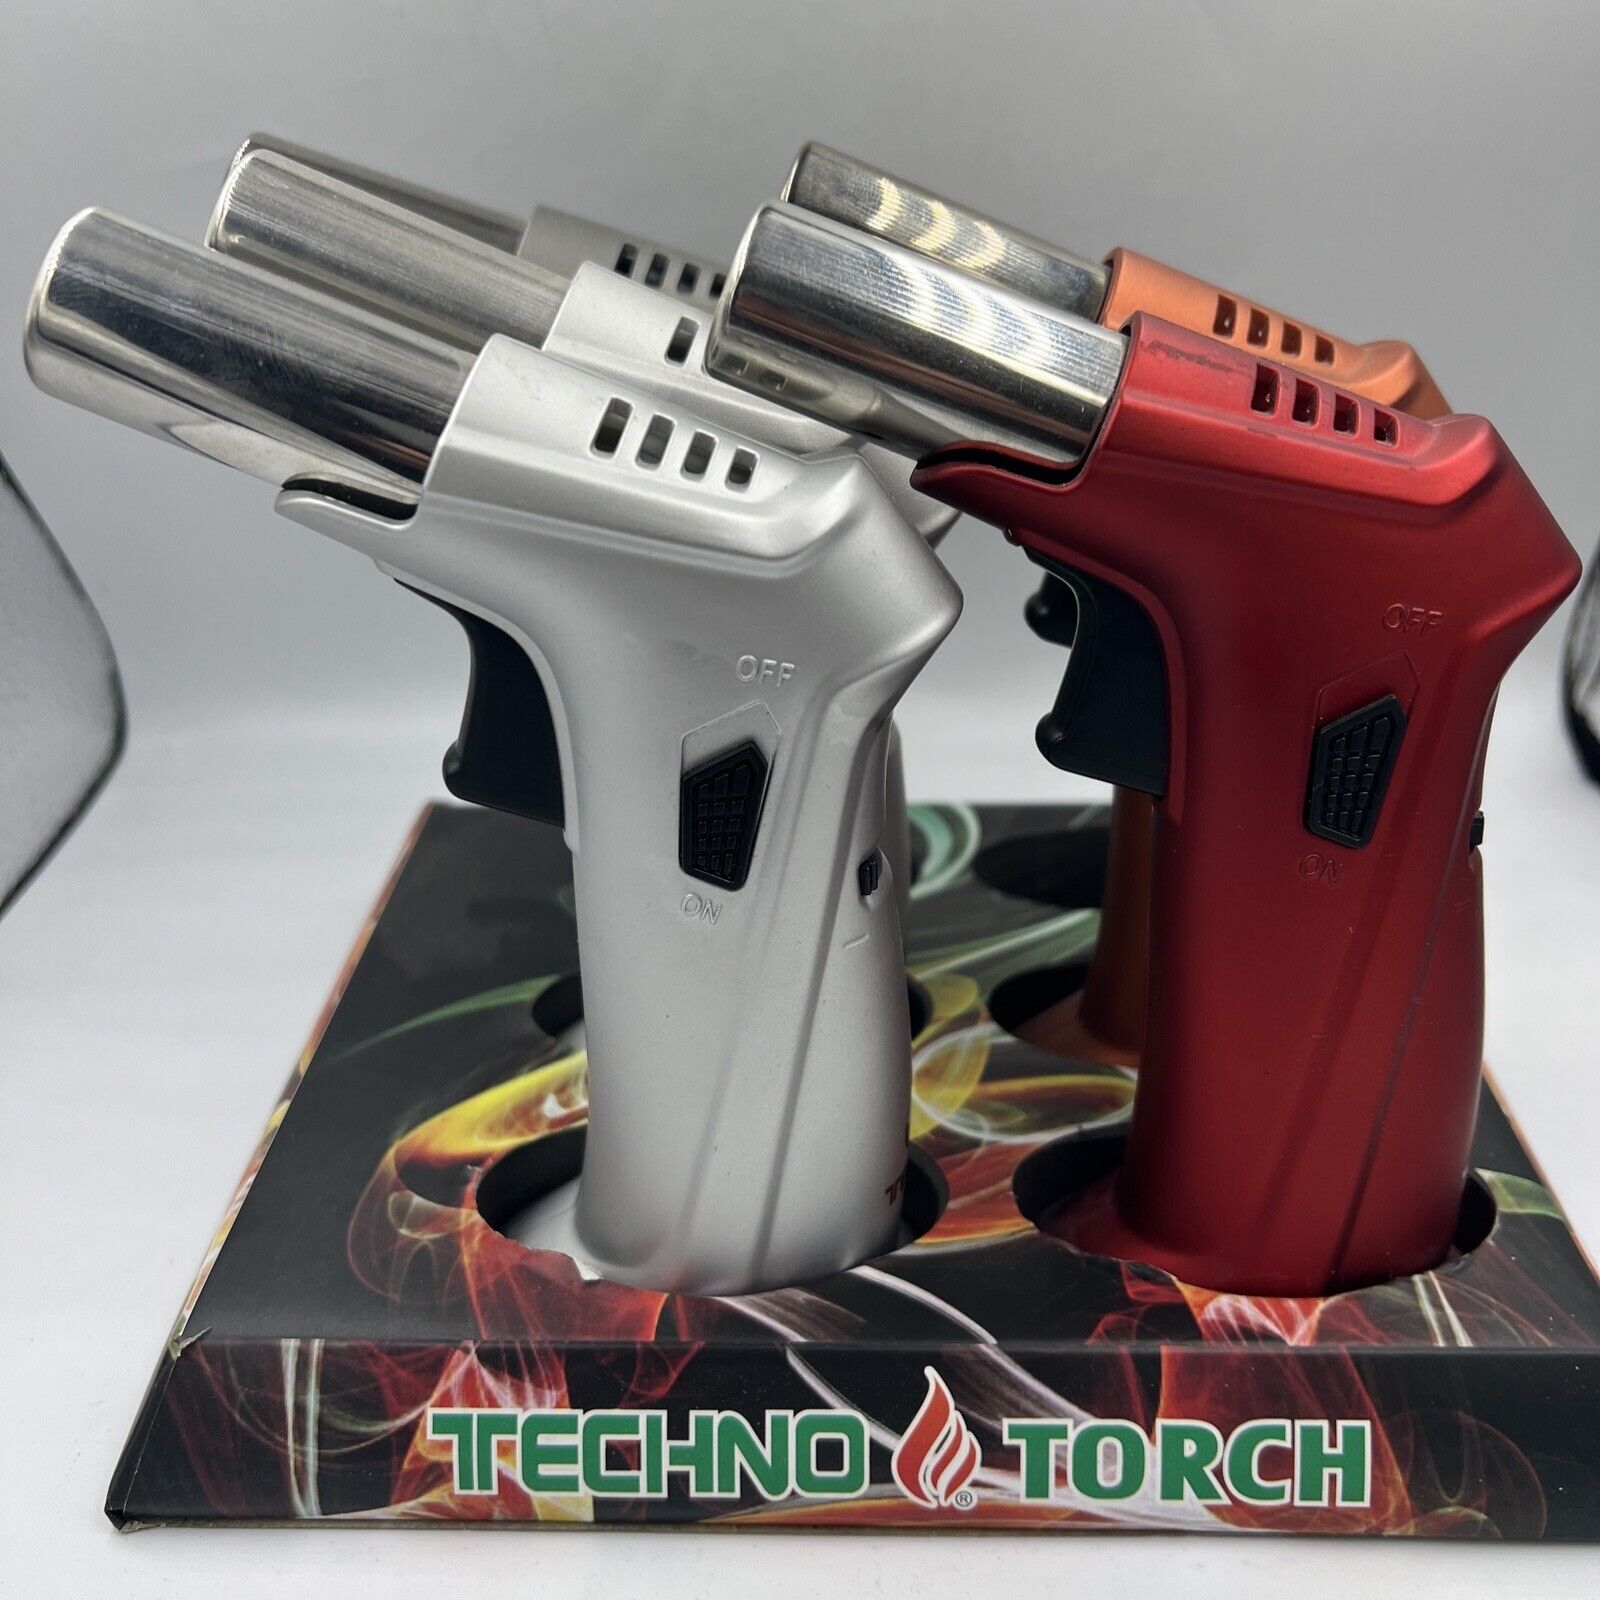 Techno Torch:  SLANT Angle TORCH LIGHTER  | Single Flame  Lighter |  Metal